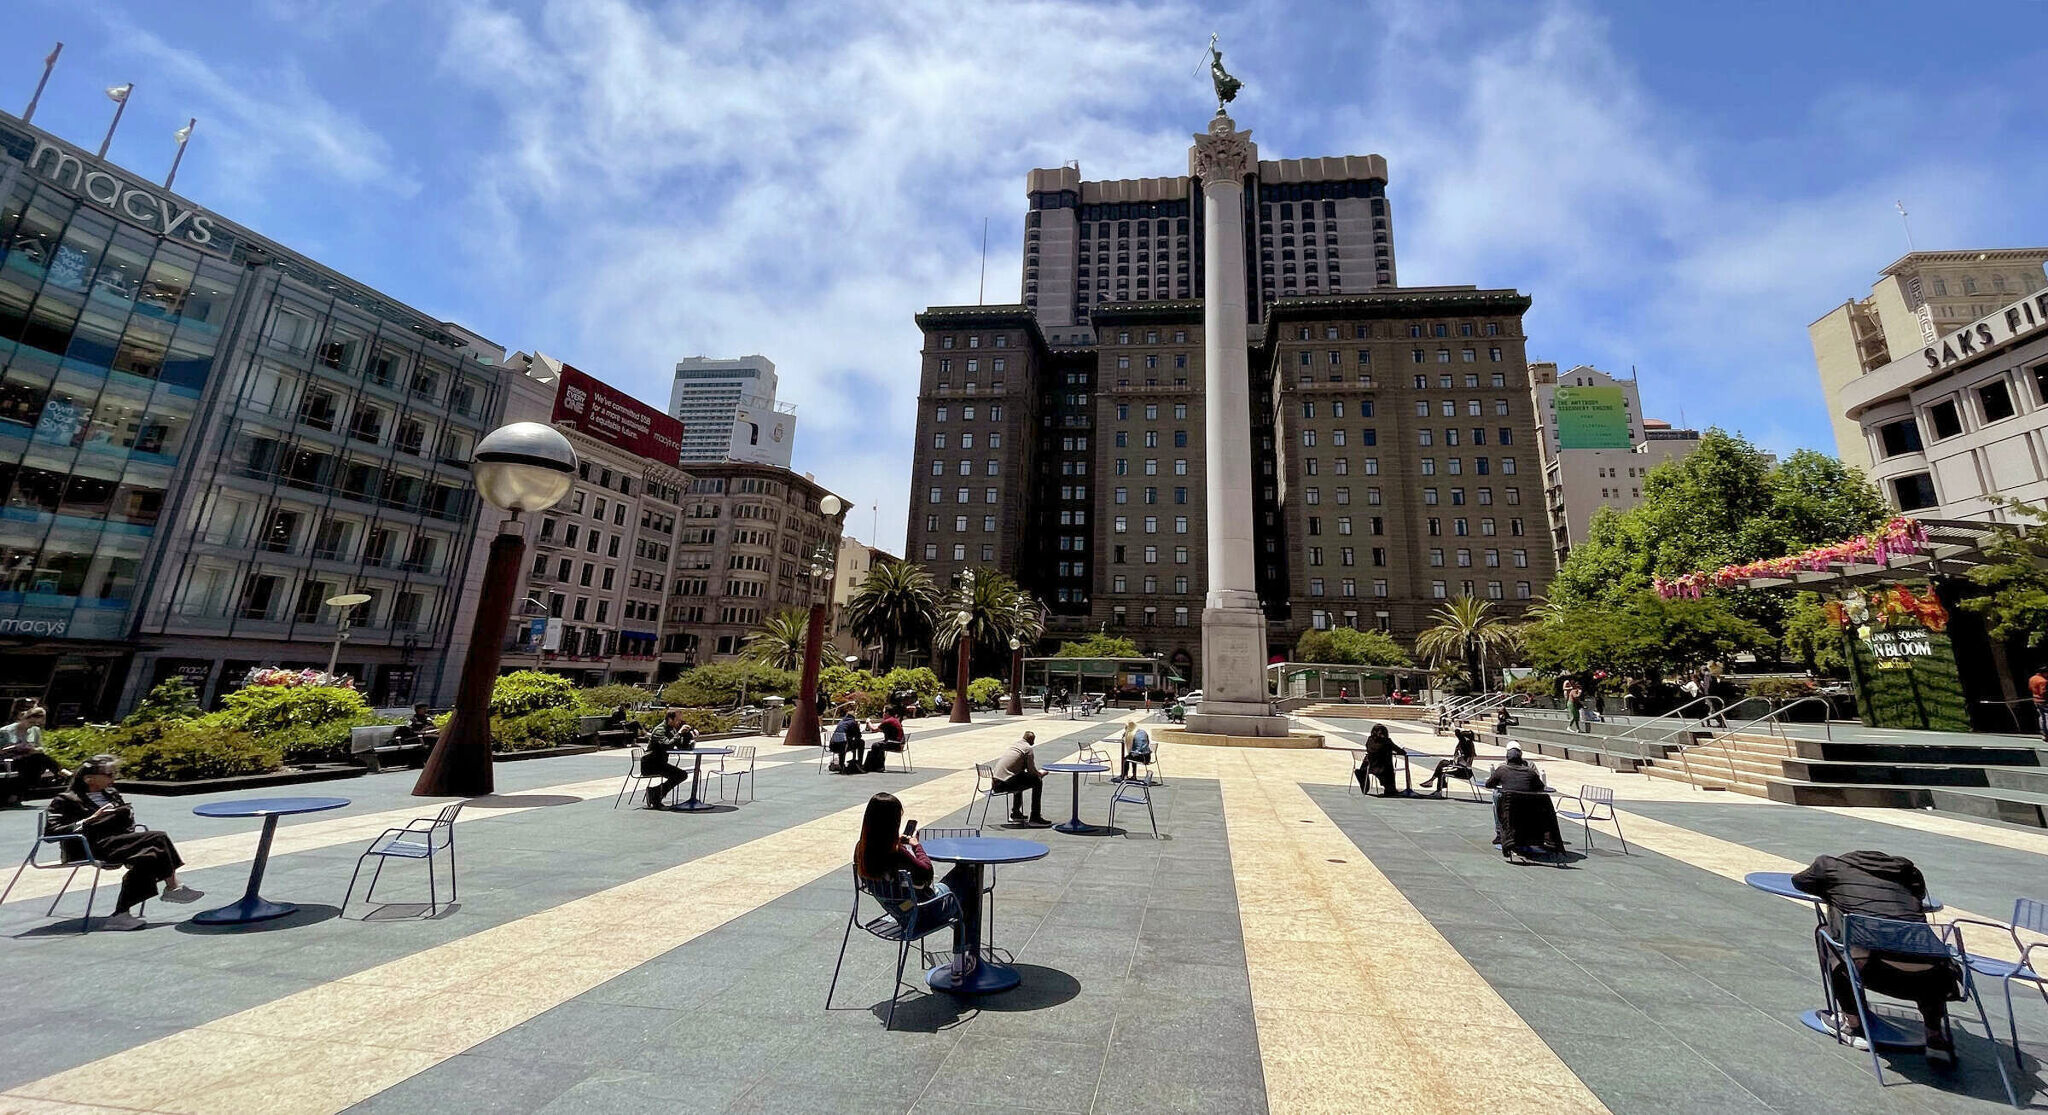 Why Union Square's 'every man for themselves' approach no longer works